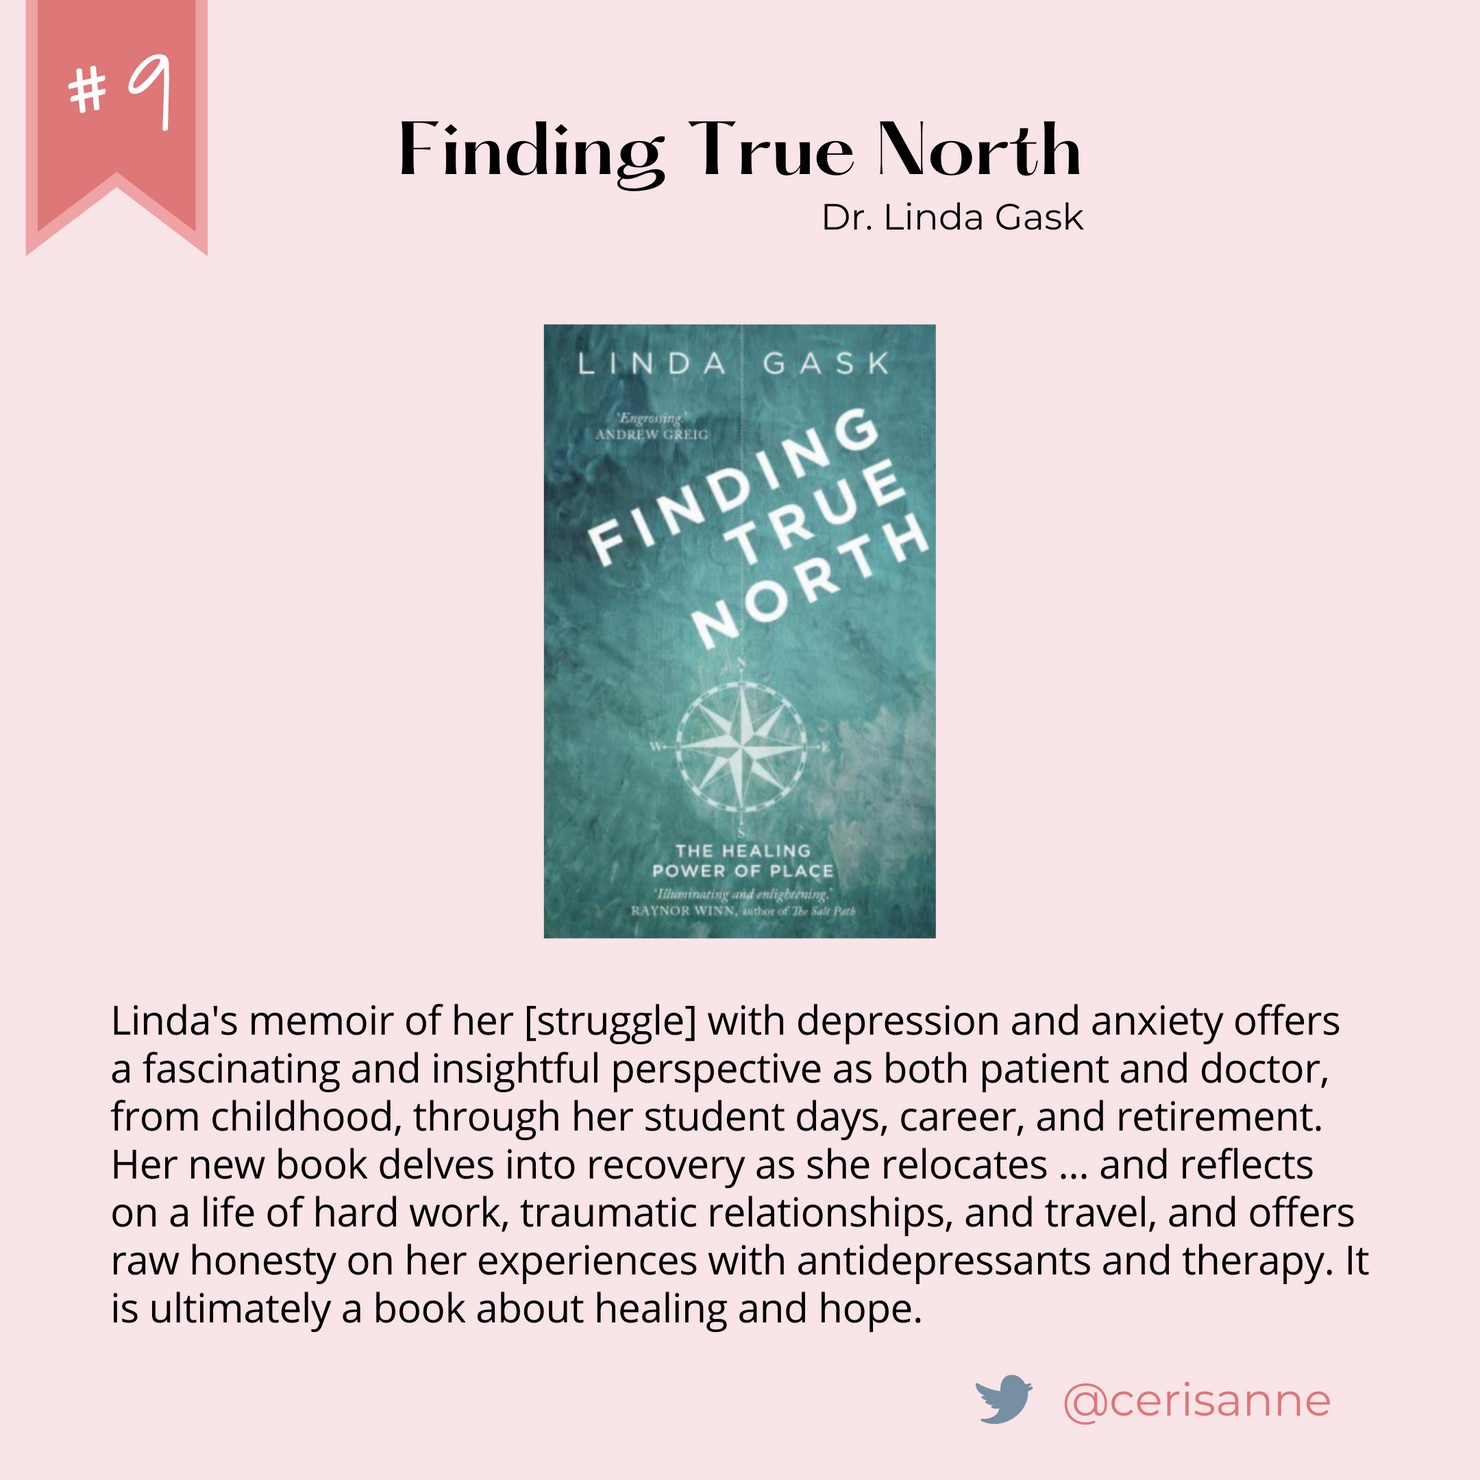 Number 9: Finding True North by Dr. Linda Gask.